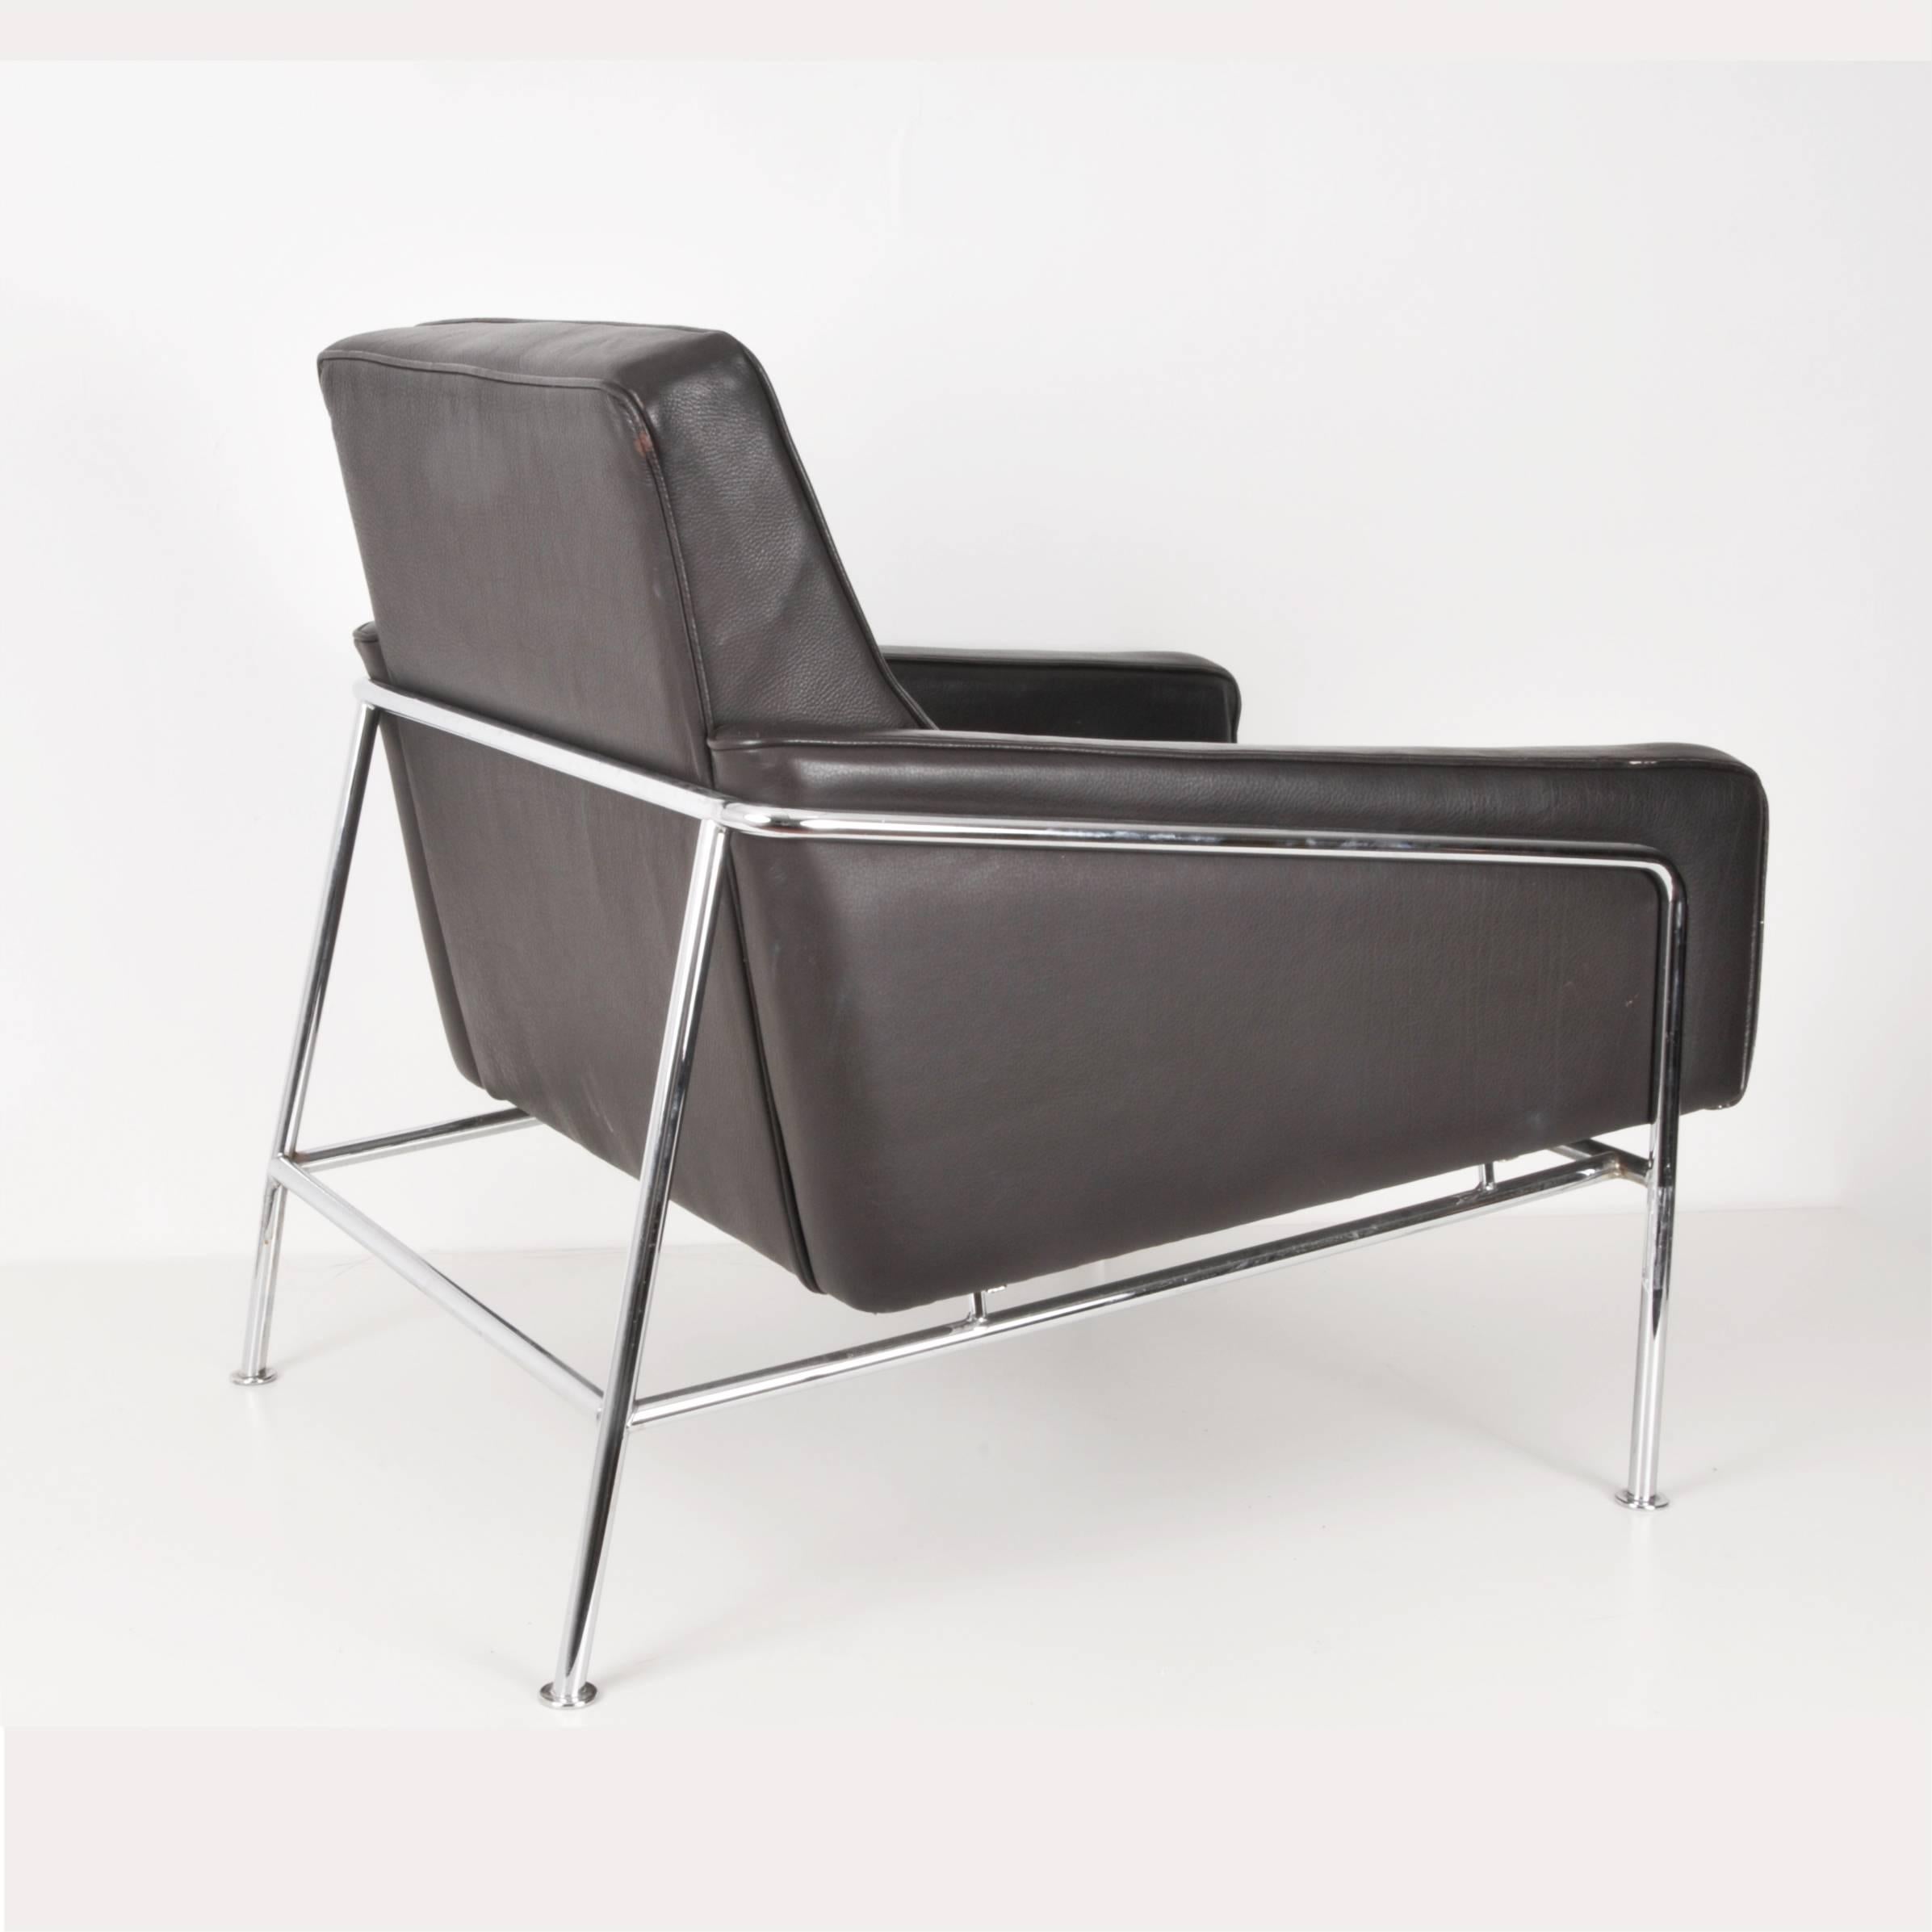 Mid-20th Century Midcentury Dark Brown Leather Lounge Chair Attributed to Arne Jacobsen, 1956 For Sale